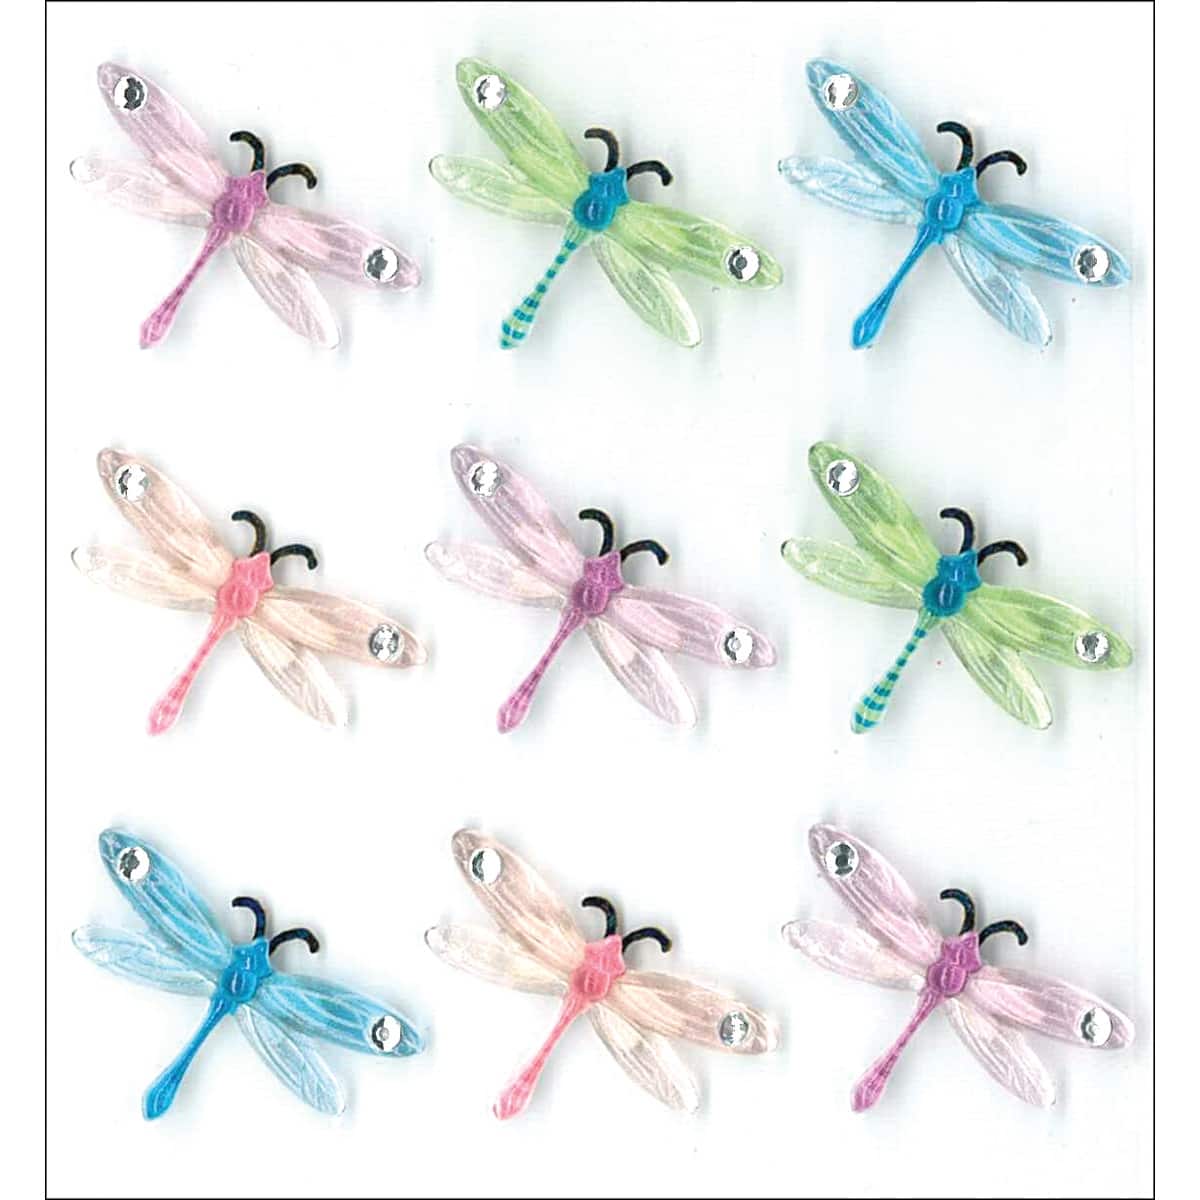 Jolee's Cabochon Dimensional Repeat Stickers-Dragonflies | Michaels